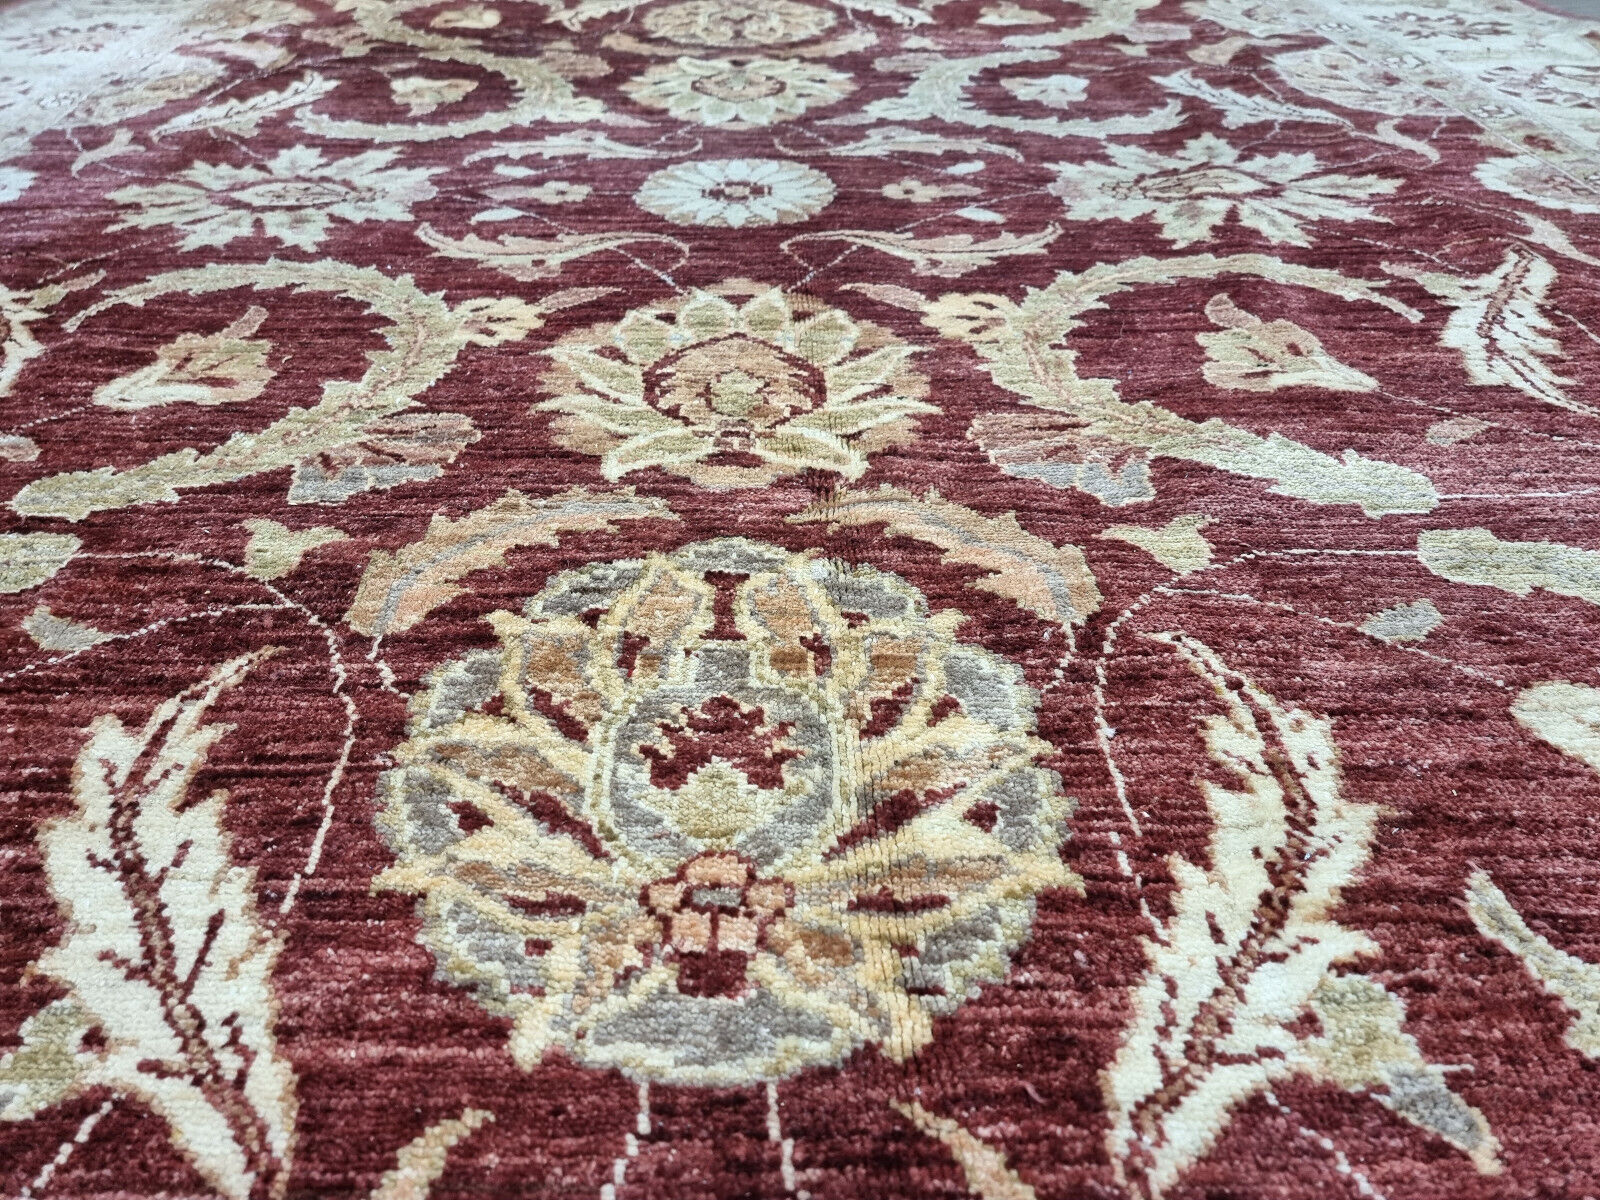 Close-up of central floral motif on Handmade Vintage Afghan Zigler Rug - Detailed view showcasing the intricate floral motif at the center of the rug.